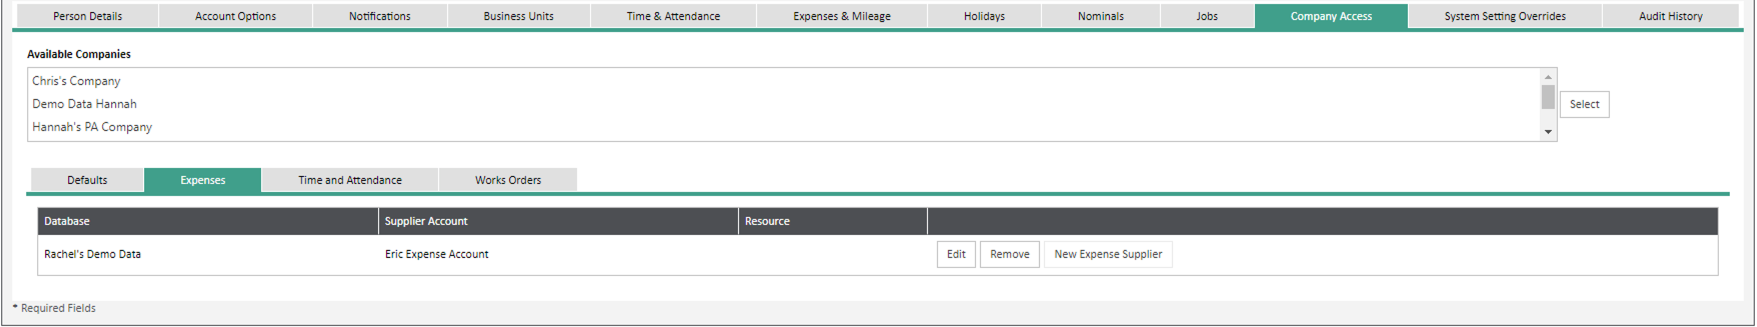 Sicon WAP Expenses Help and User Guide - Expenses HUG Section 22.7 Image 1